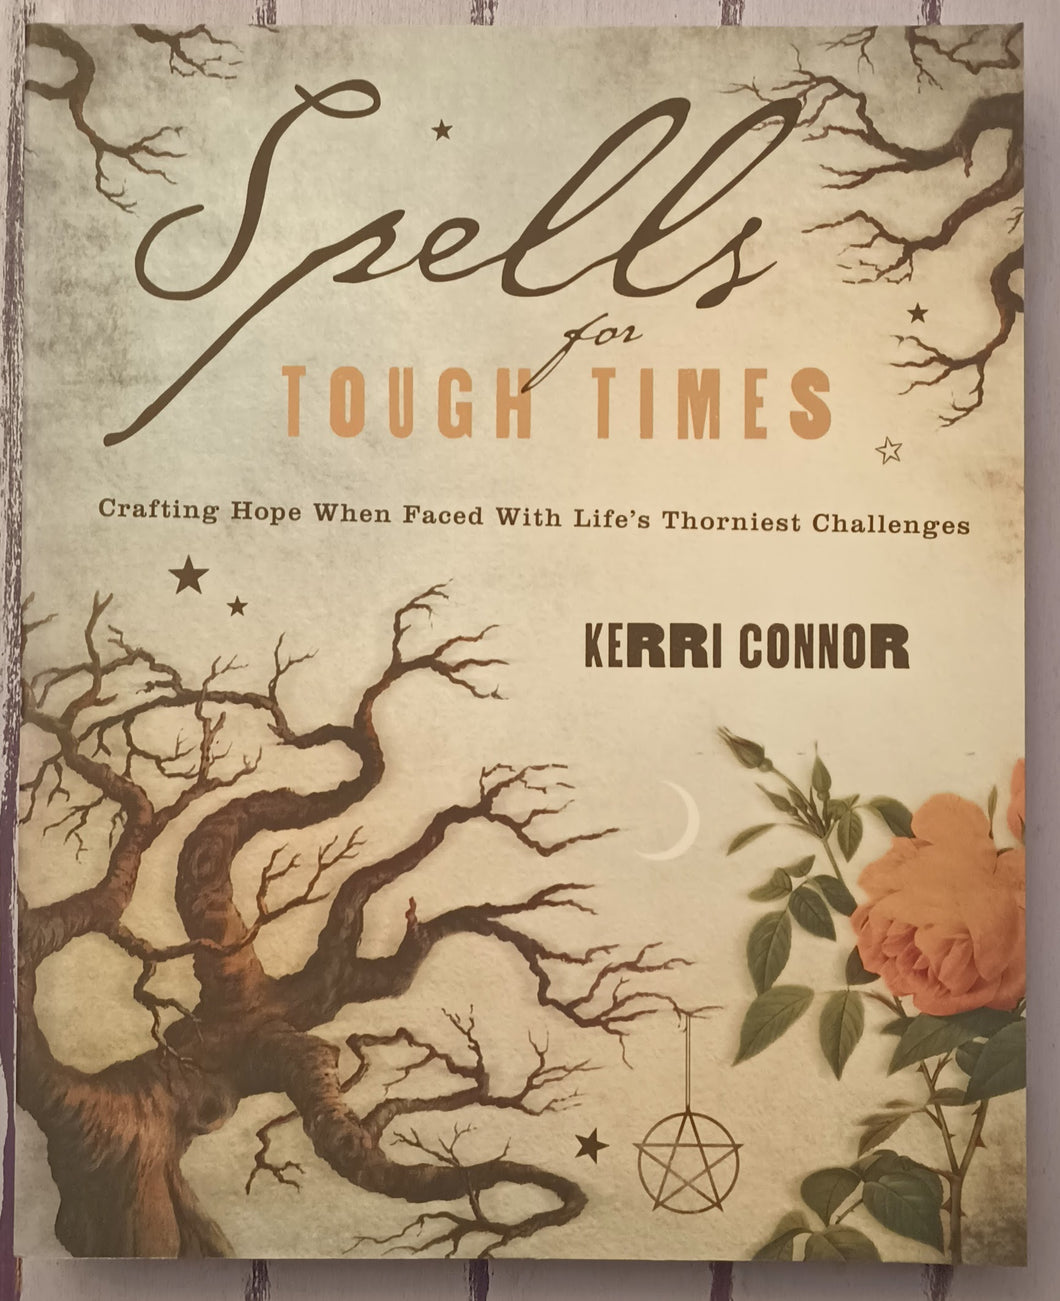 Spells for Tough Times: Crafting Hope When Faced With Life's Thorniest Challenges